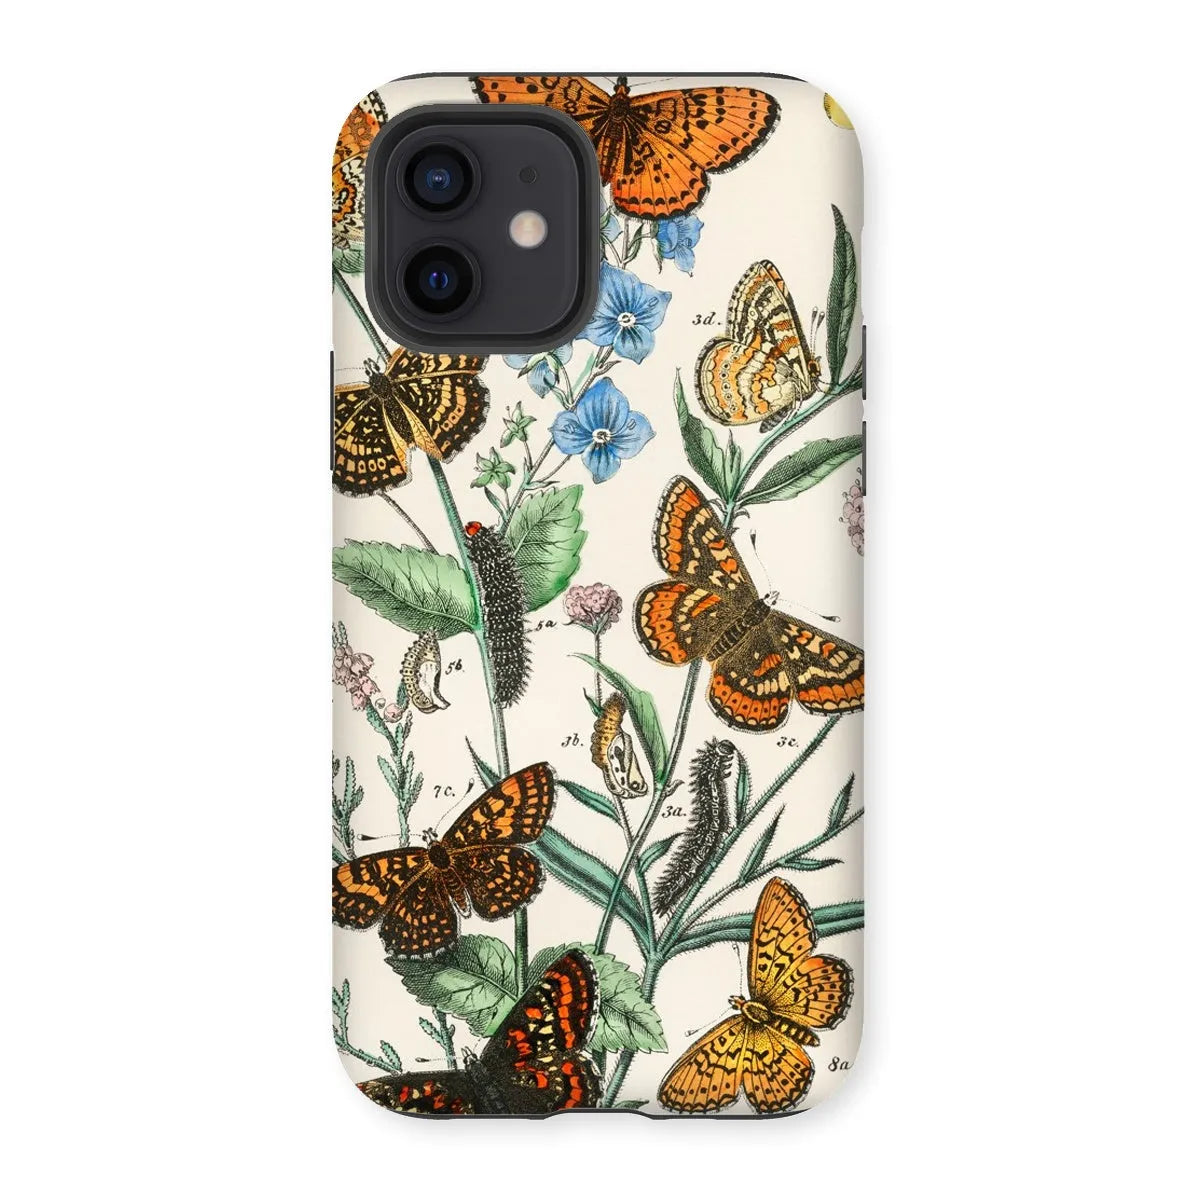 This Butterfly Aesthetic Art Phone Case - William Forsell Kirby - Iphone 12 / Matte - Mobile Phone Cases - Aesthetic Art